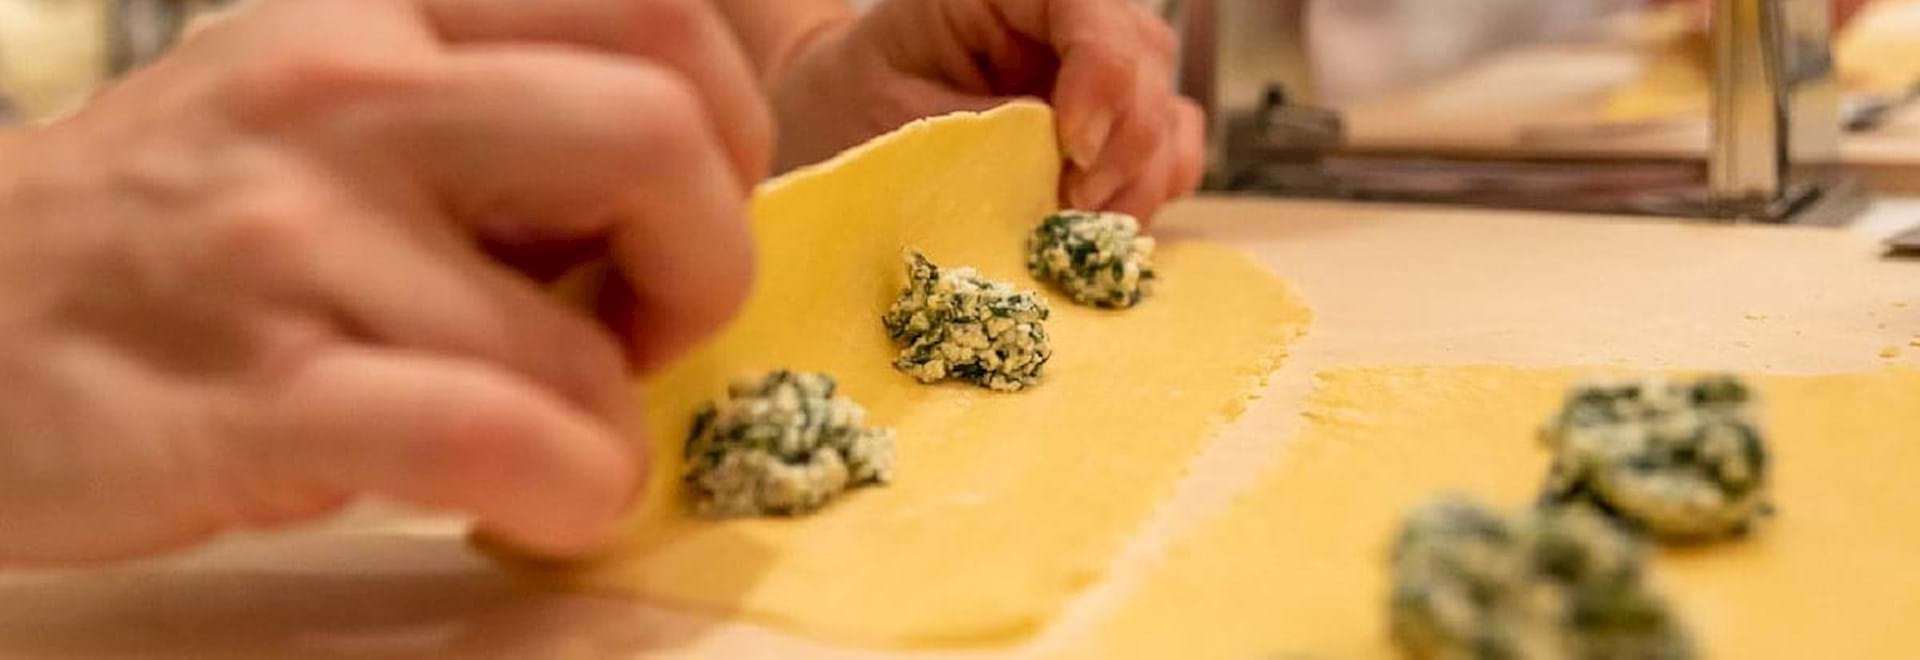 Pasta Making Class, freshly homemade Ravioli with Spinach and Ricotta cheese